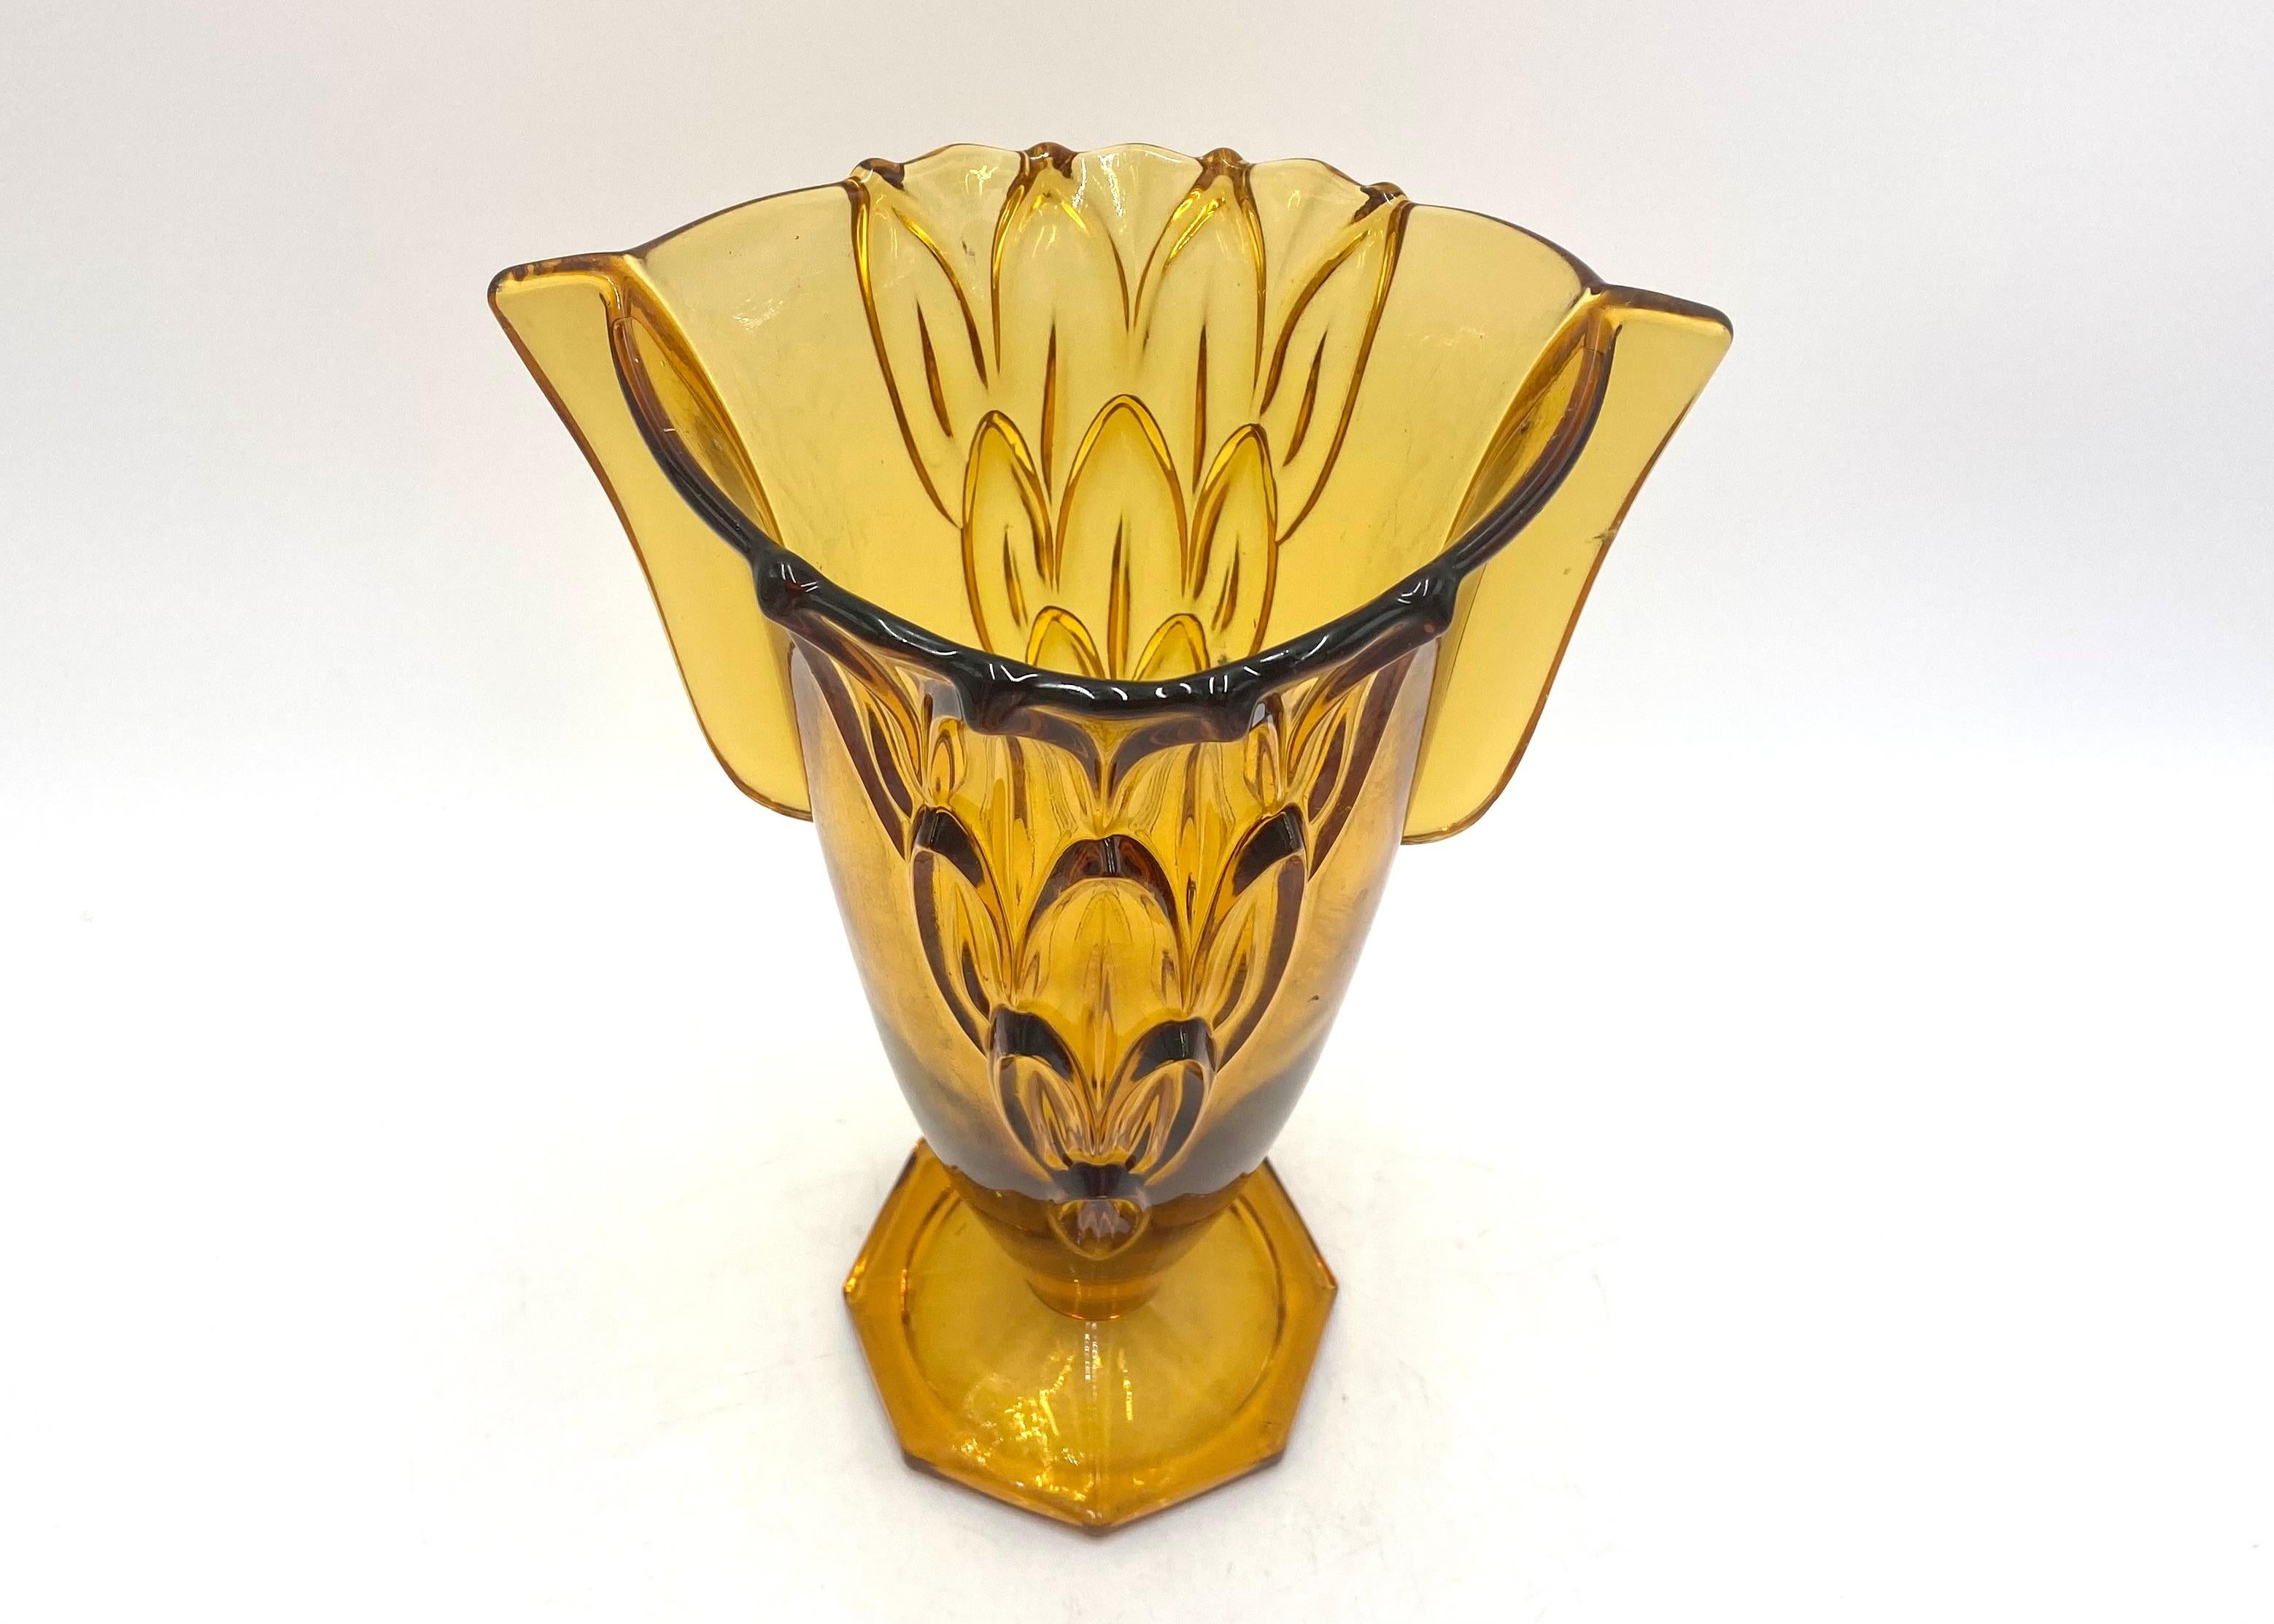 A glass vase in the Art Deco style, model 19085, amber in a leafy pattern.

Produced by Hermanova Hut / Stolzle in the Czech Republic in the 1930s.

Very good condition.

Measures: height 26cm, width 17cm, depth 13.5cm.